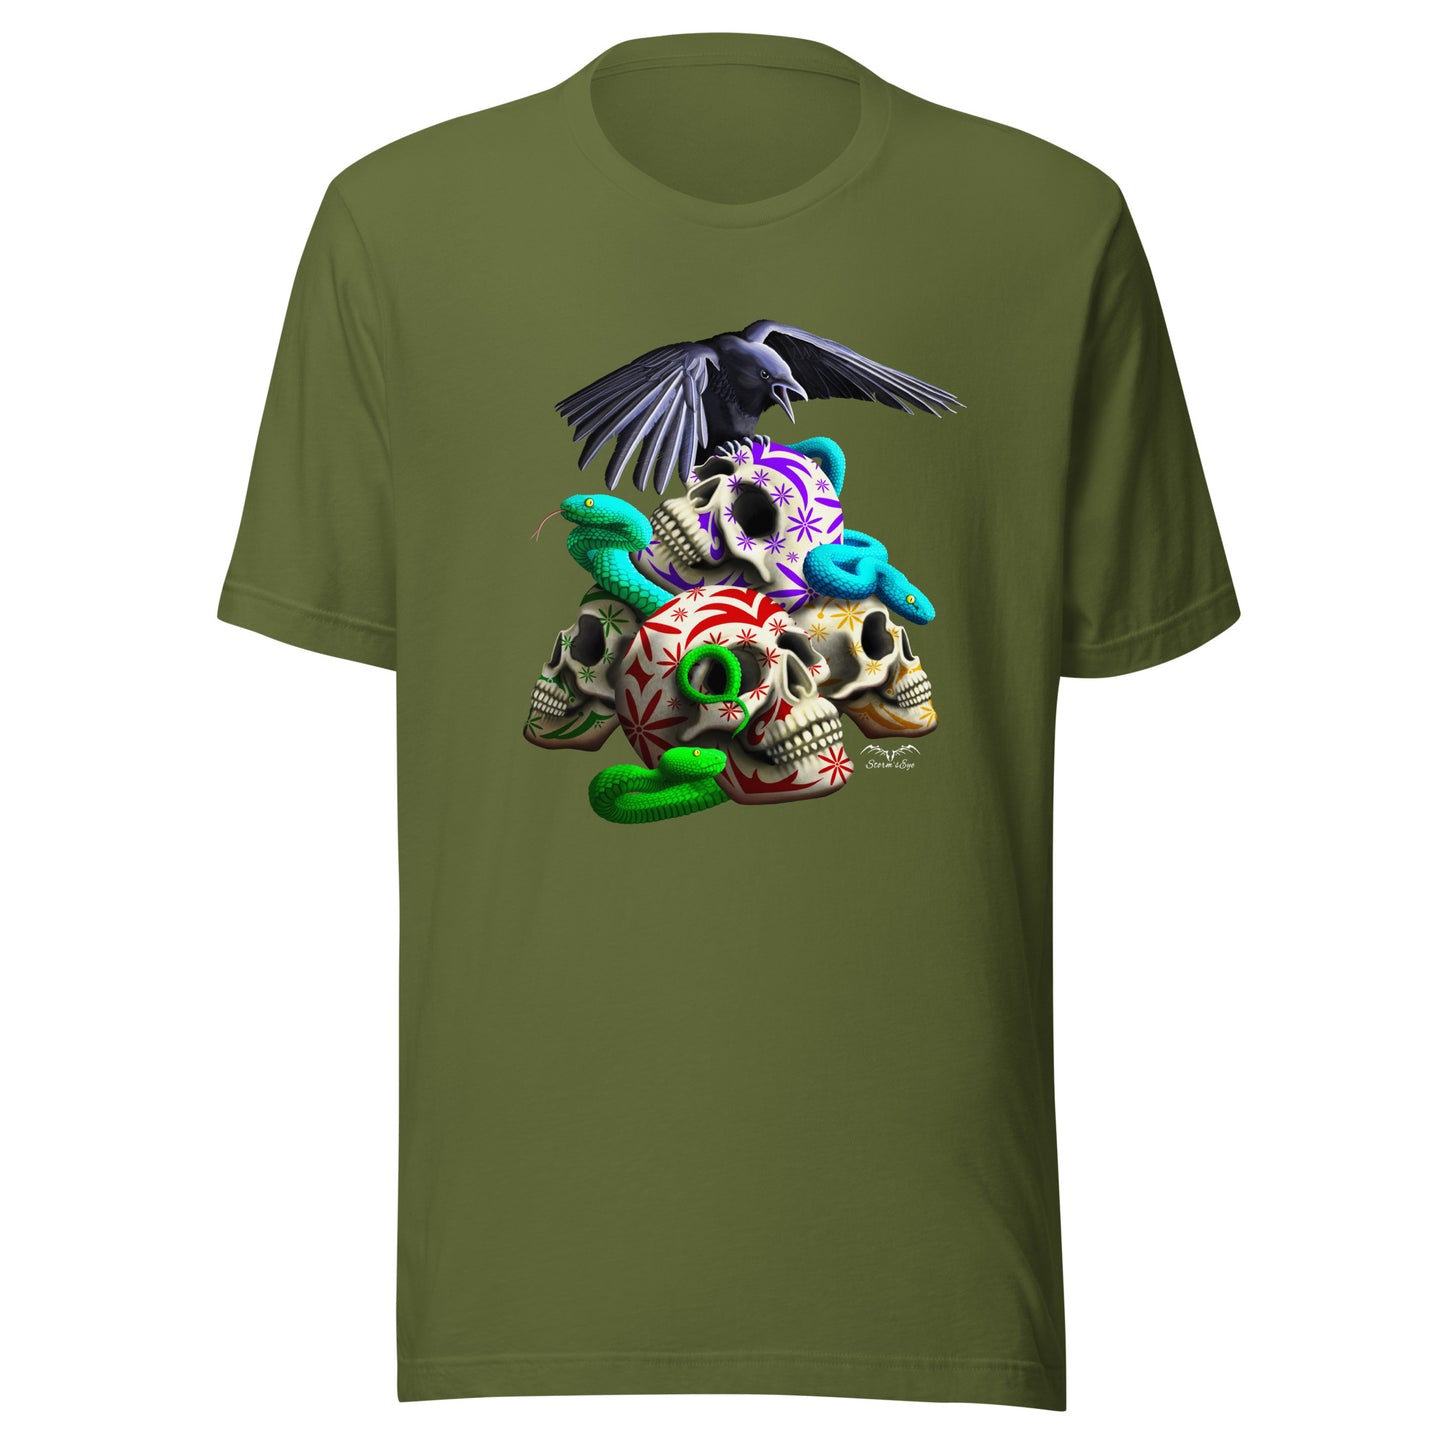 stormseye design gothic sugar skulls and snakes T shirt flat view olive green